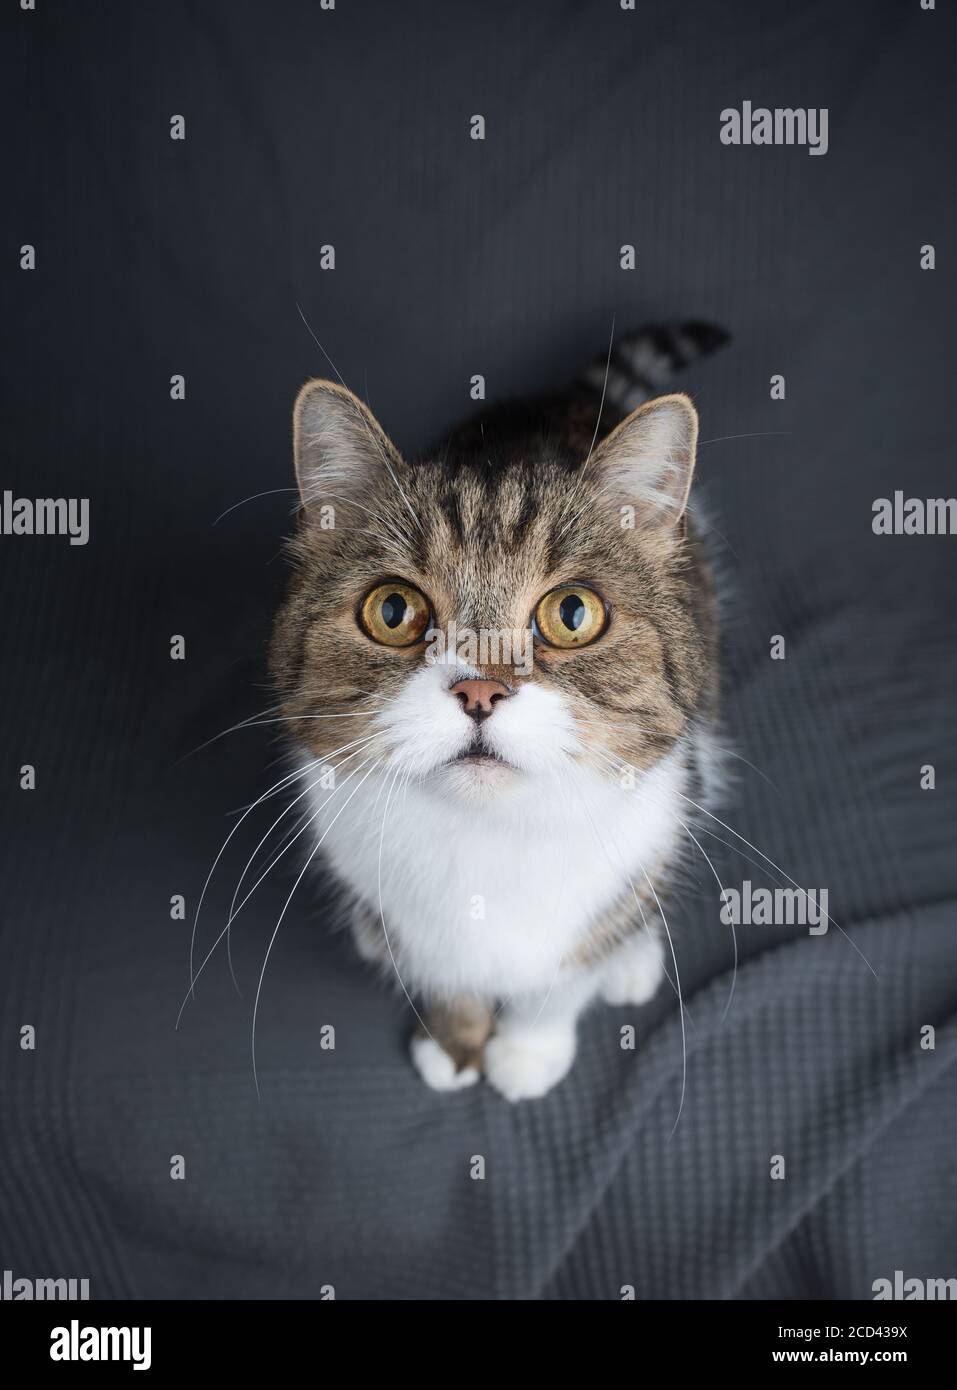 tabby british shorthair cat looking up begging for treats Stock Photo